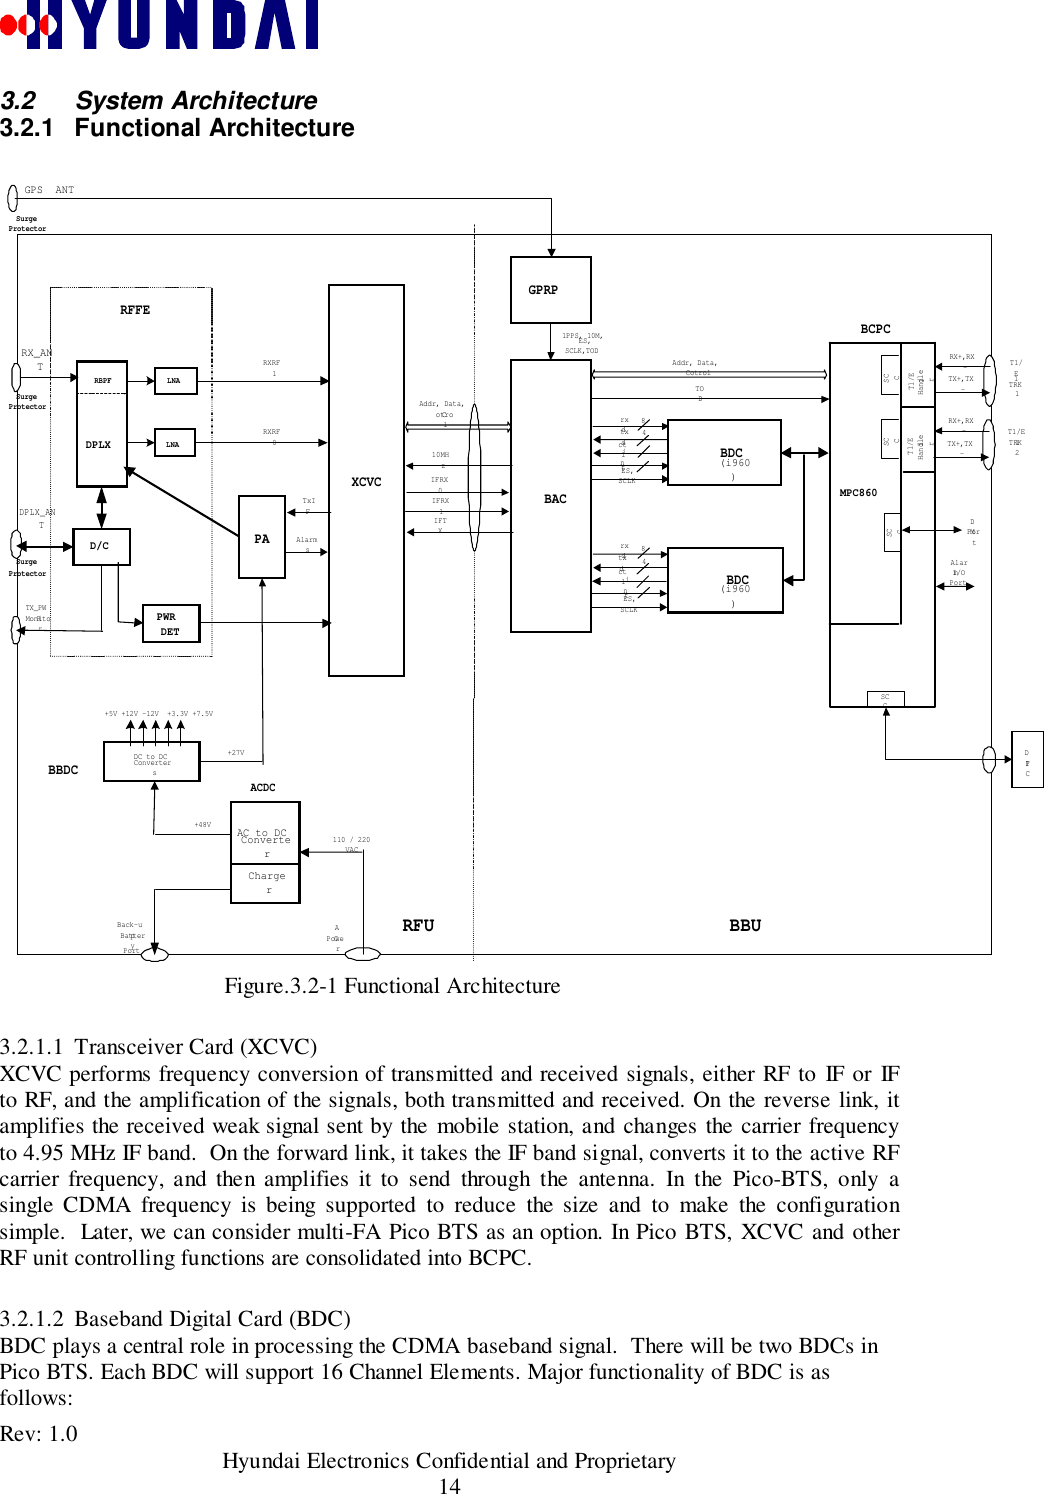 Rev: 1.0                                           Hyundai Electronics Confidential and Proprietary143.2 System Architecture3.2.1 Functional ArchitectureFigure.3.2-1 Functional Architecture3.2.1.1 Transceiver Card (XCVC)XCVC performs frequency conversion of transmitted and received signals, either RF to IF or IFto RF, and the amplification of the signals, both transmitted and received. On the reverse link, itamplifies the received weak signal sent by the mobile station, and changes the carrier frequencyto 4.95 MHz IF band.  On the forward link, it takes the IF band signal, converts it to the active RFcarrier frequency, and then amplifies it to send through the antenna. In the Pico-BTS, only asingle CDMA frequency is being supported to reduce the size and to make the configurationsimple.  Later, we can consider multi-FA Pico BTS as an option. In Pico BTS, XCVC and otherRF unit controlling functions are consolidated into BCPC.3.2.1.2 Baseband Digital Card (BDC)BDC plays a central role in processing the CDMA baseband signal.  There will be two BDCs inPico BTS. Each BDC will support 16 Channel Elements. Major functionality of BDC is asfollows:RX_ANTDPLX_ANTXCVCIFRX0IFRX1IFTXPAGPS  ANT BDCBDCBCPCMPC860(i960)DC to DC ConvertersBBDCACDC110 / 220 VACRFU BBUDPLXRFFEDTPC48rxdtxdctlint84ES, SCLKDMPort1PPS, 10M, ES, SCLK,TODRXRF1RXRF0TxIFBACtxdctlrxdintES, SCLKRBPFD/CGPRP+5V +12V -12V  +3.3V +7.5V    Addr, Data, CotrolAddr, Data, CotrolAlarmsTX_PWRMonitorBack-upBatteryPort Alarm I/O PortACPower10MHzTOD(i960)SCCSCCAC to DC  ConverterCharger+27V     +48V     LNALNARX+,RX-TX+,TX-T1/E1HandlerT1/E1TRK1SCCRX+,RX-TX+,TX-T1/E1HandlerT1/E1TRK2SCCSurgeProtectorSurgeProtectorSurgeProtectorPWR DET